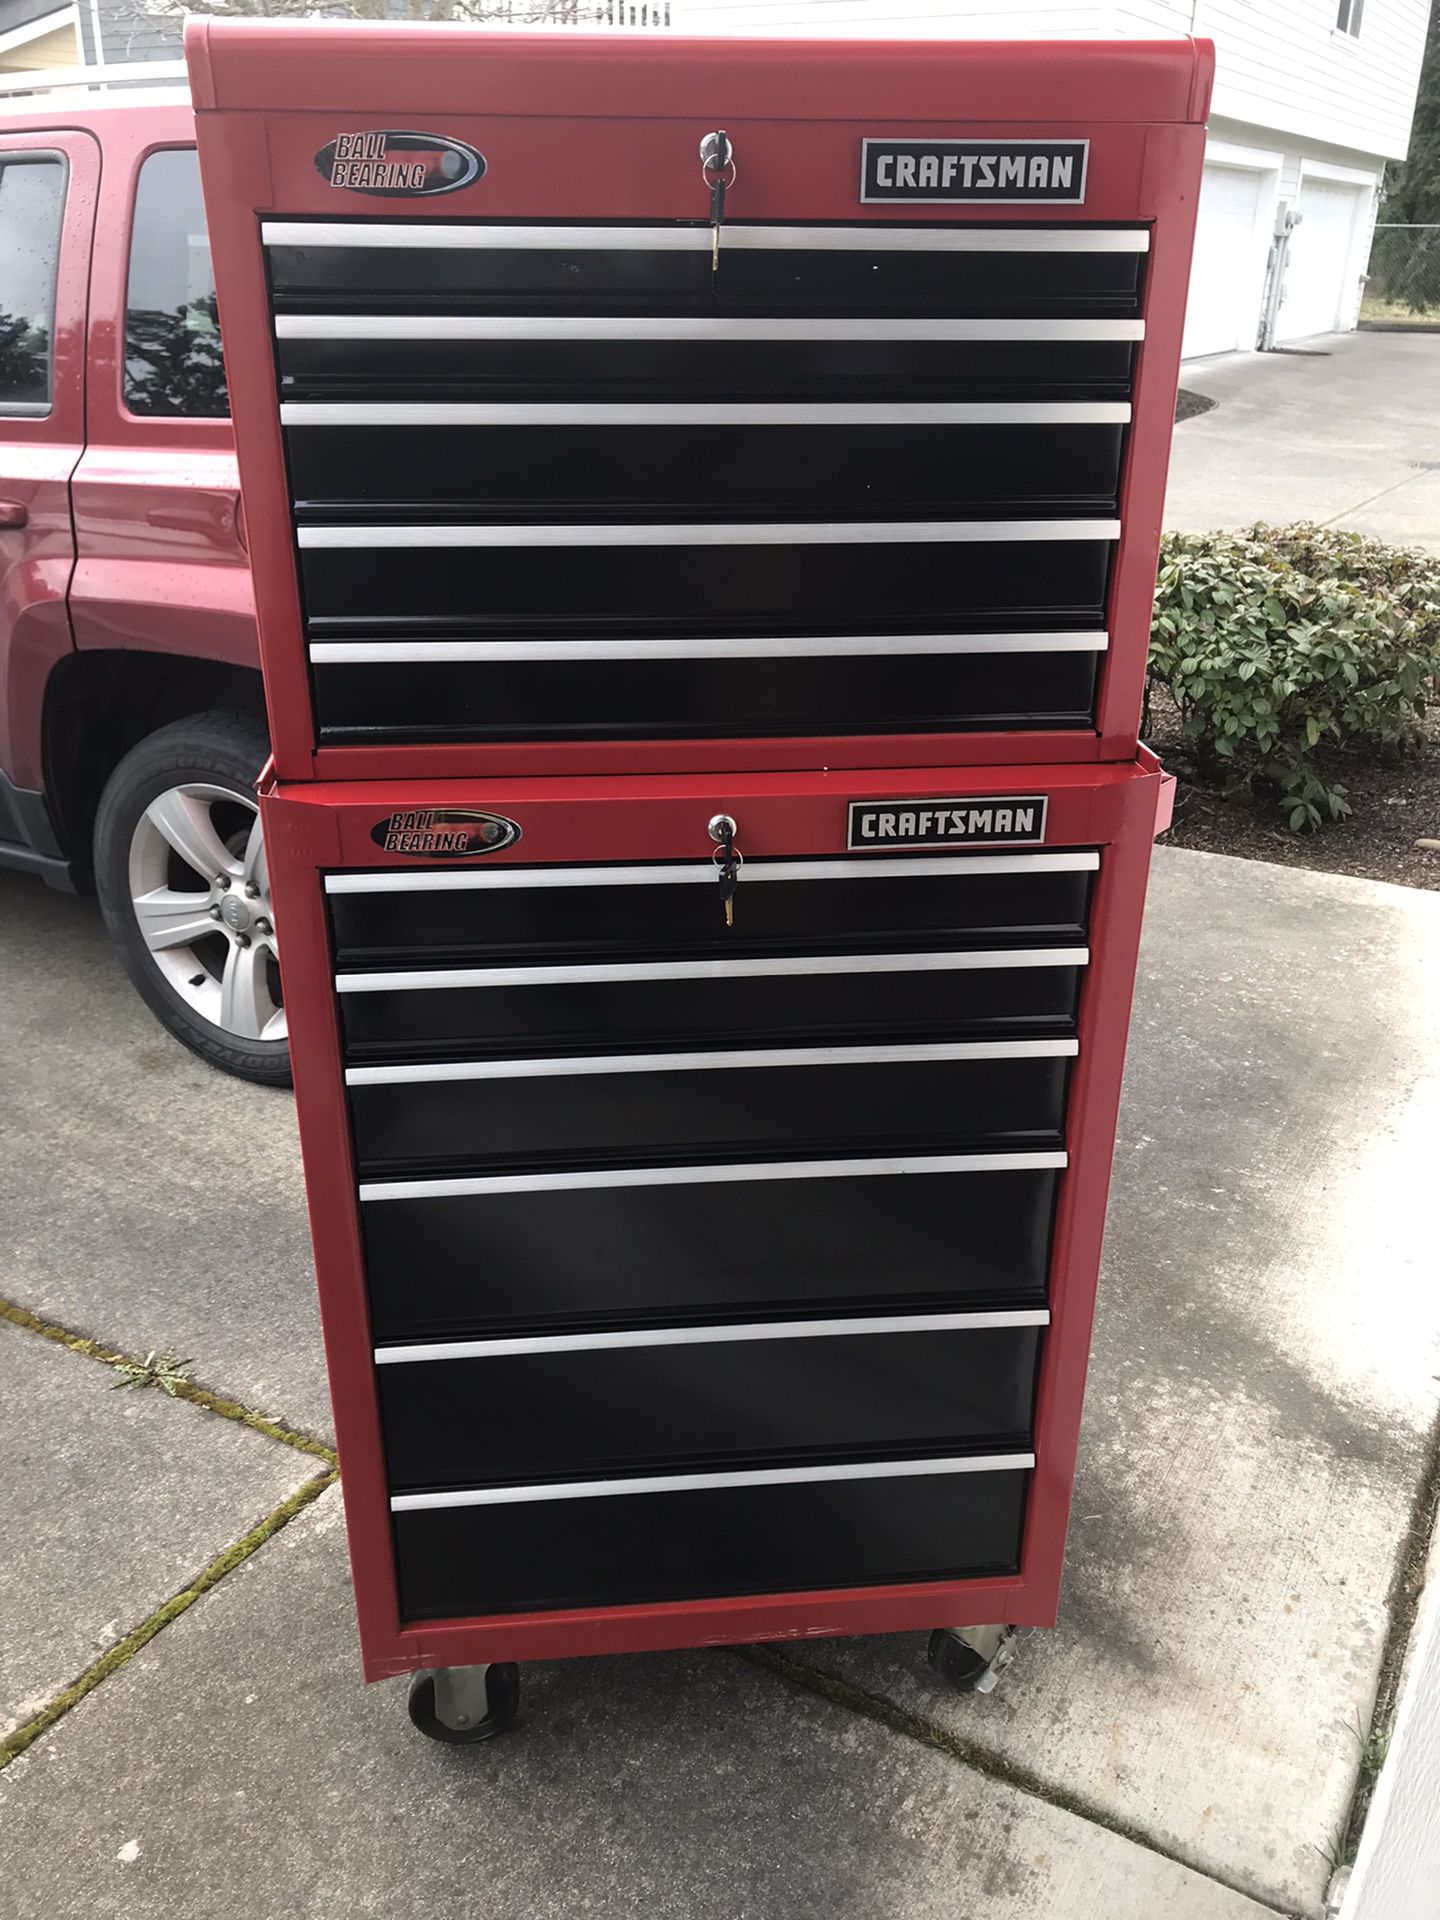 Craftsman 12 Drawer Tool Box for Sale in Tacoma, WA - OfferUp